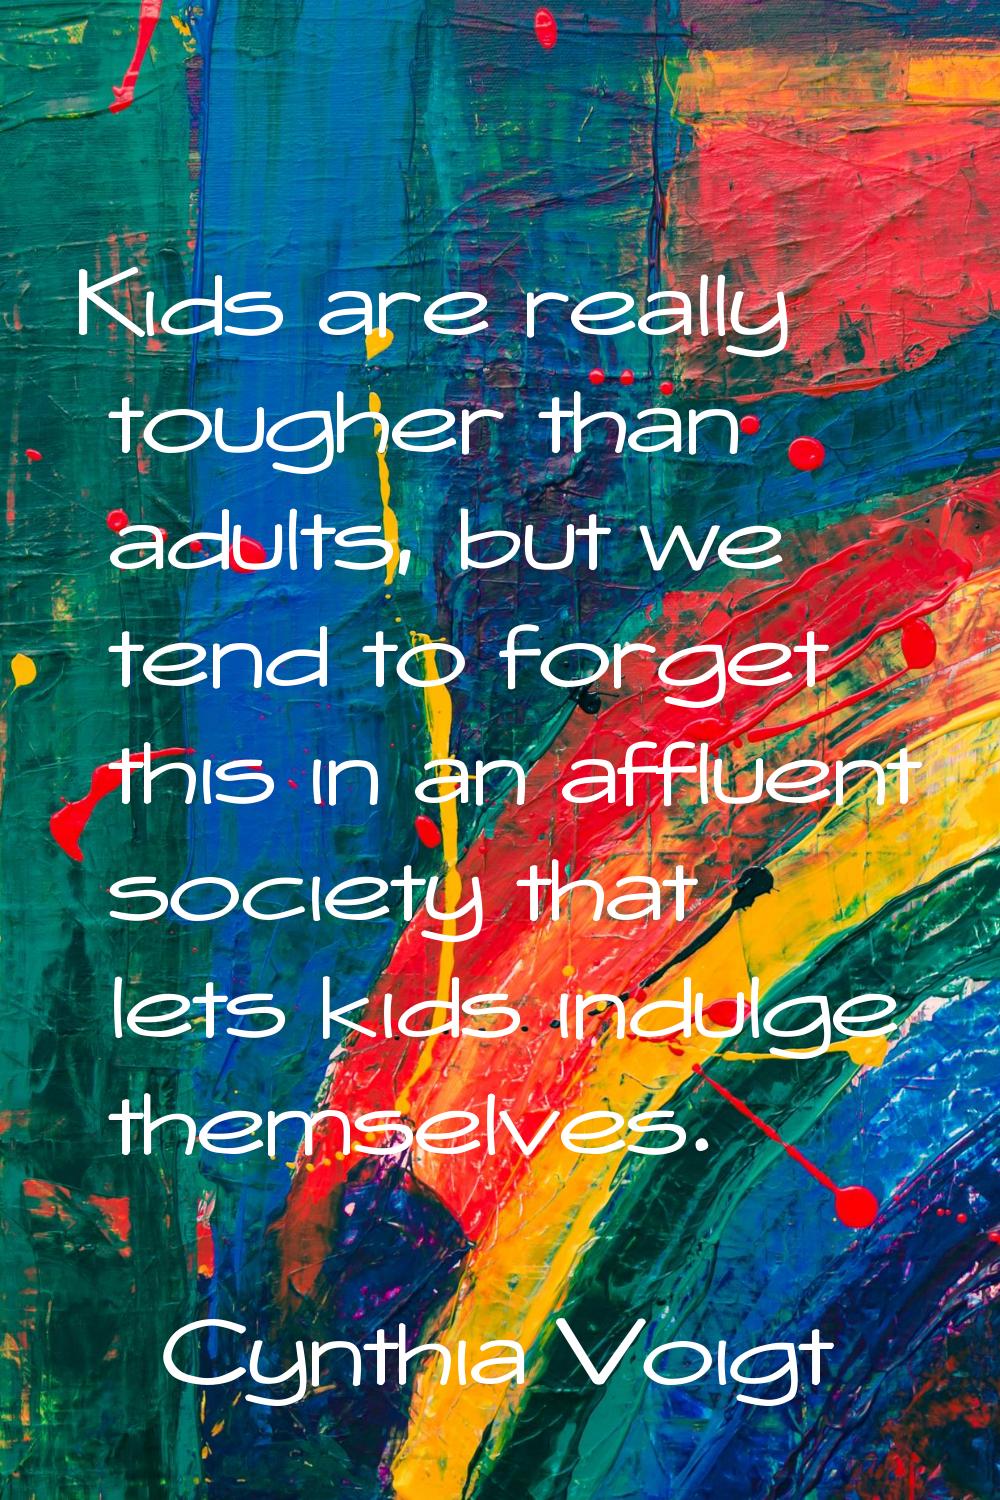 Kids are really tougher than adults, but we tend to forget this in an affluent society that lets ki